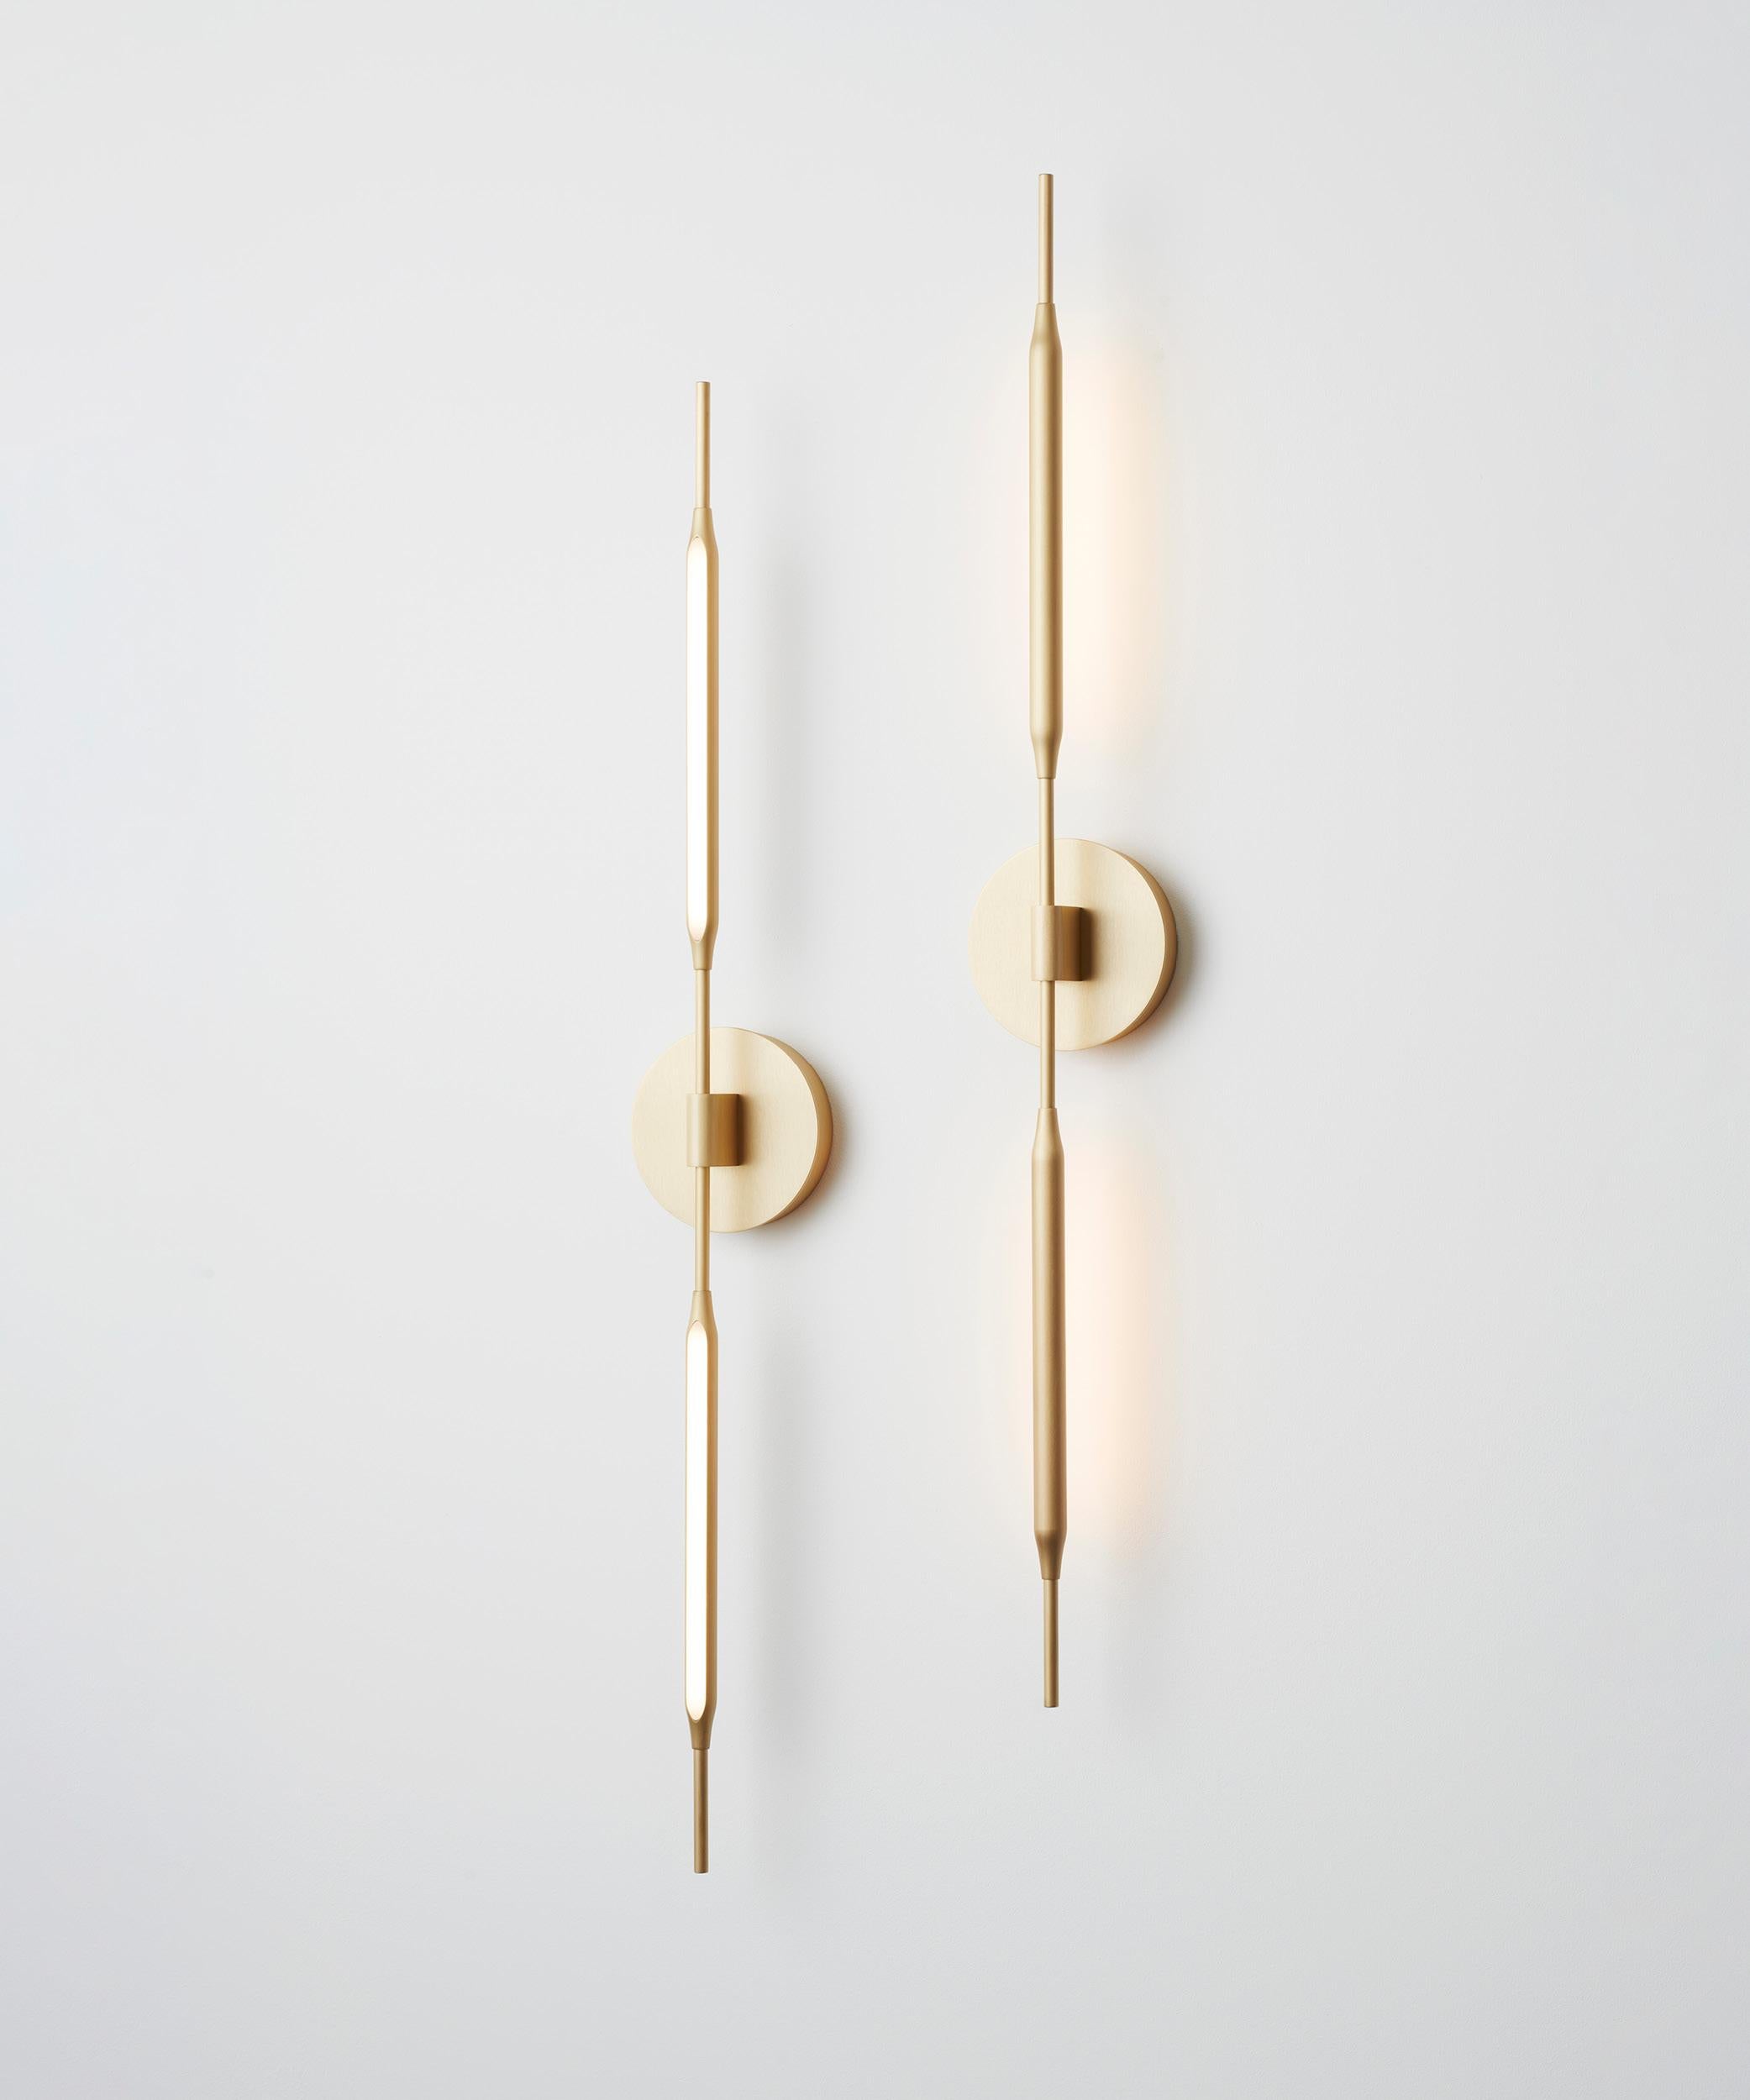 Frosted Reed Wall Light in Matt-white Powdercoat Finish, UL Listed For Sale